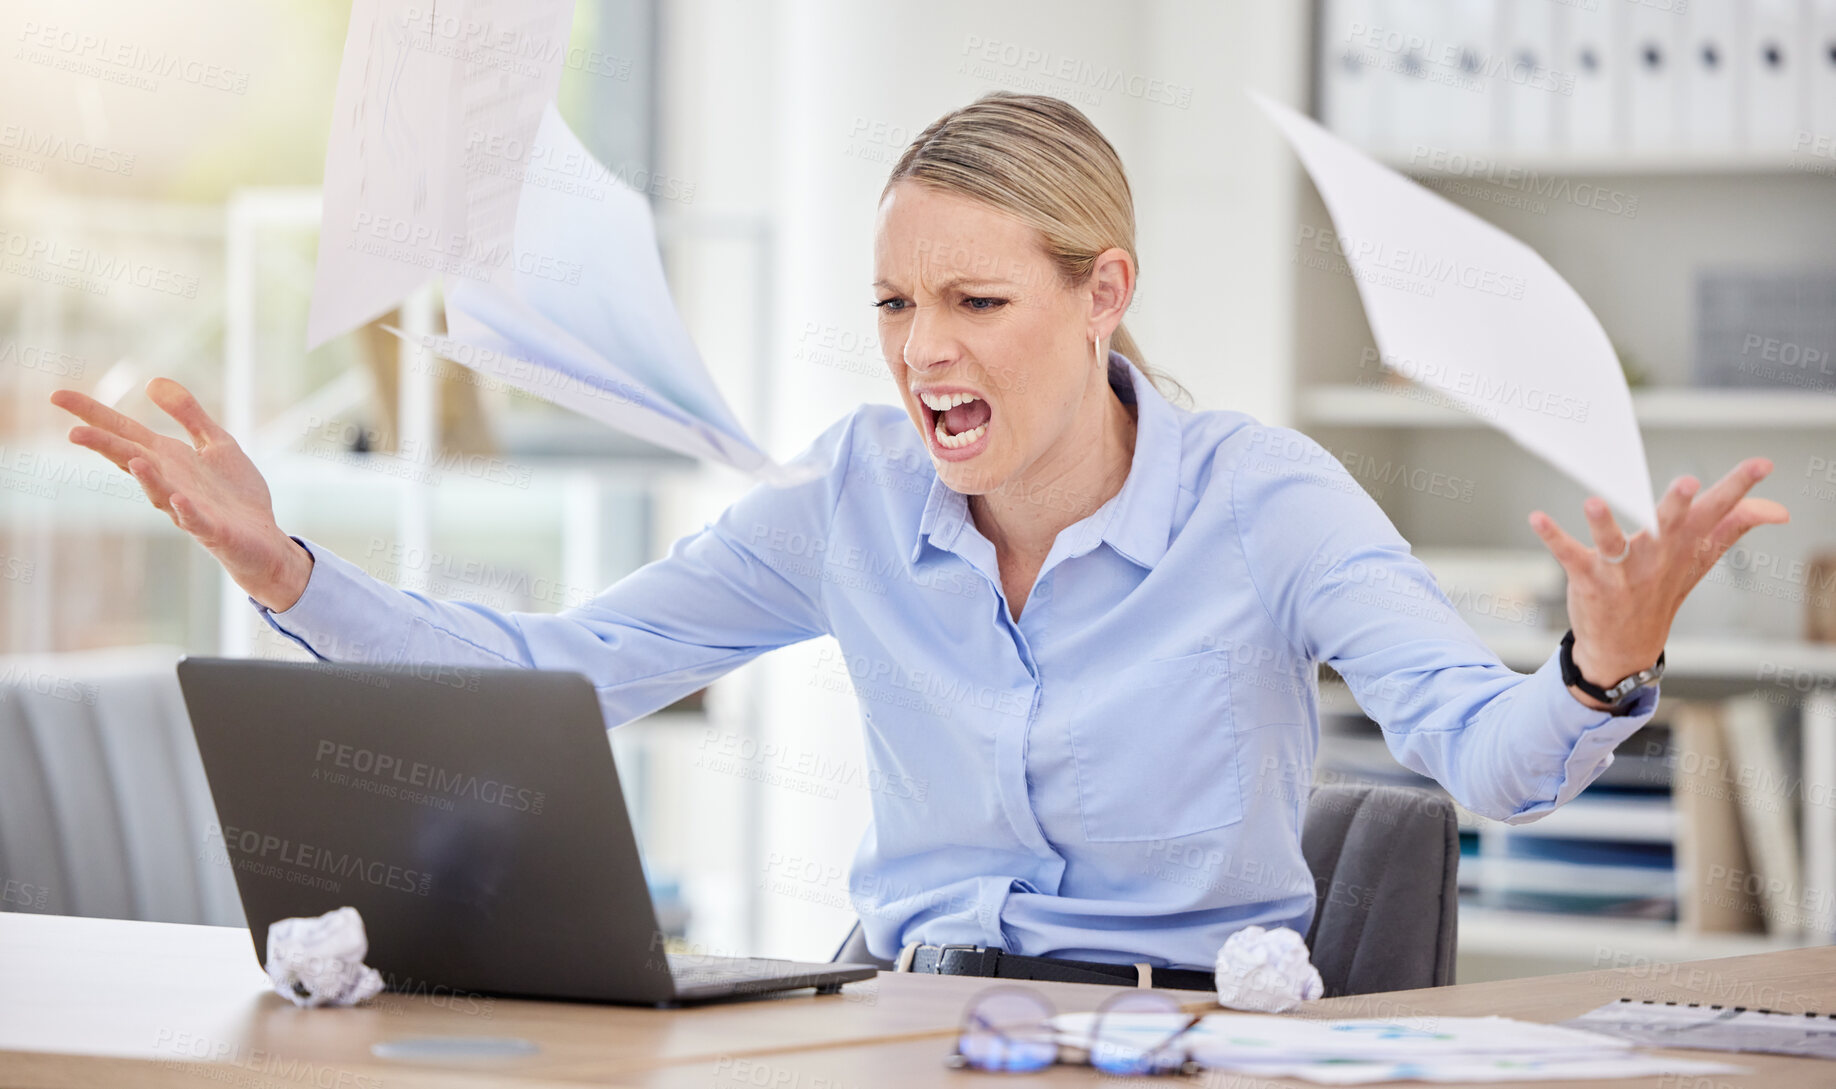 Buy stock photo Angry business woman throwing paperwork documents in stress, frustrated and 404 laptop glitch in office. Entrepreneur screaming in anger with internet problem, burnout crisis and tax audit mistake